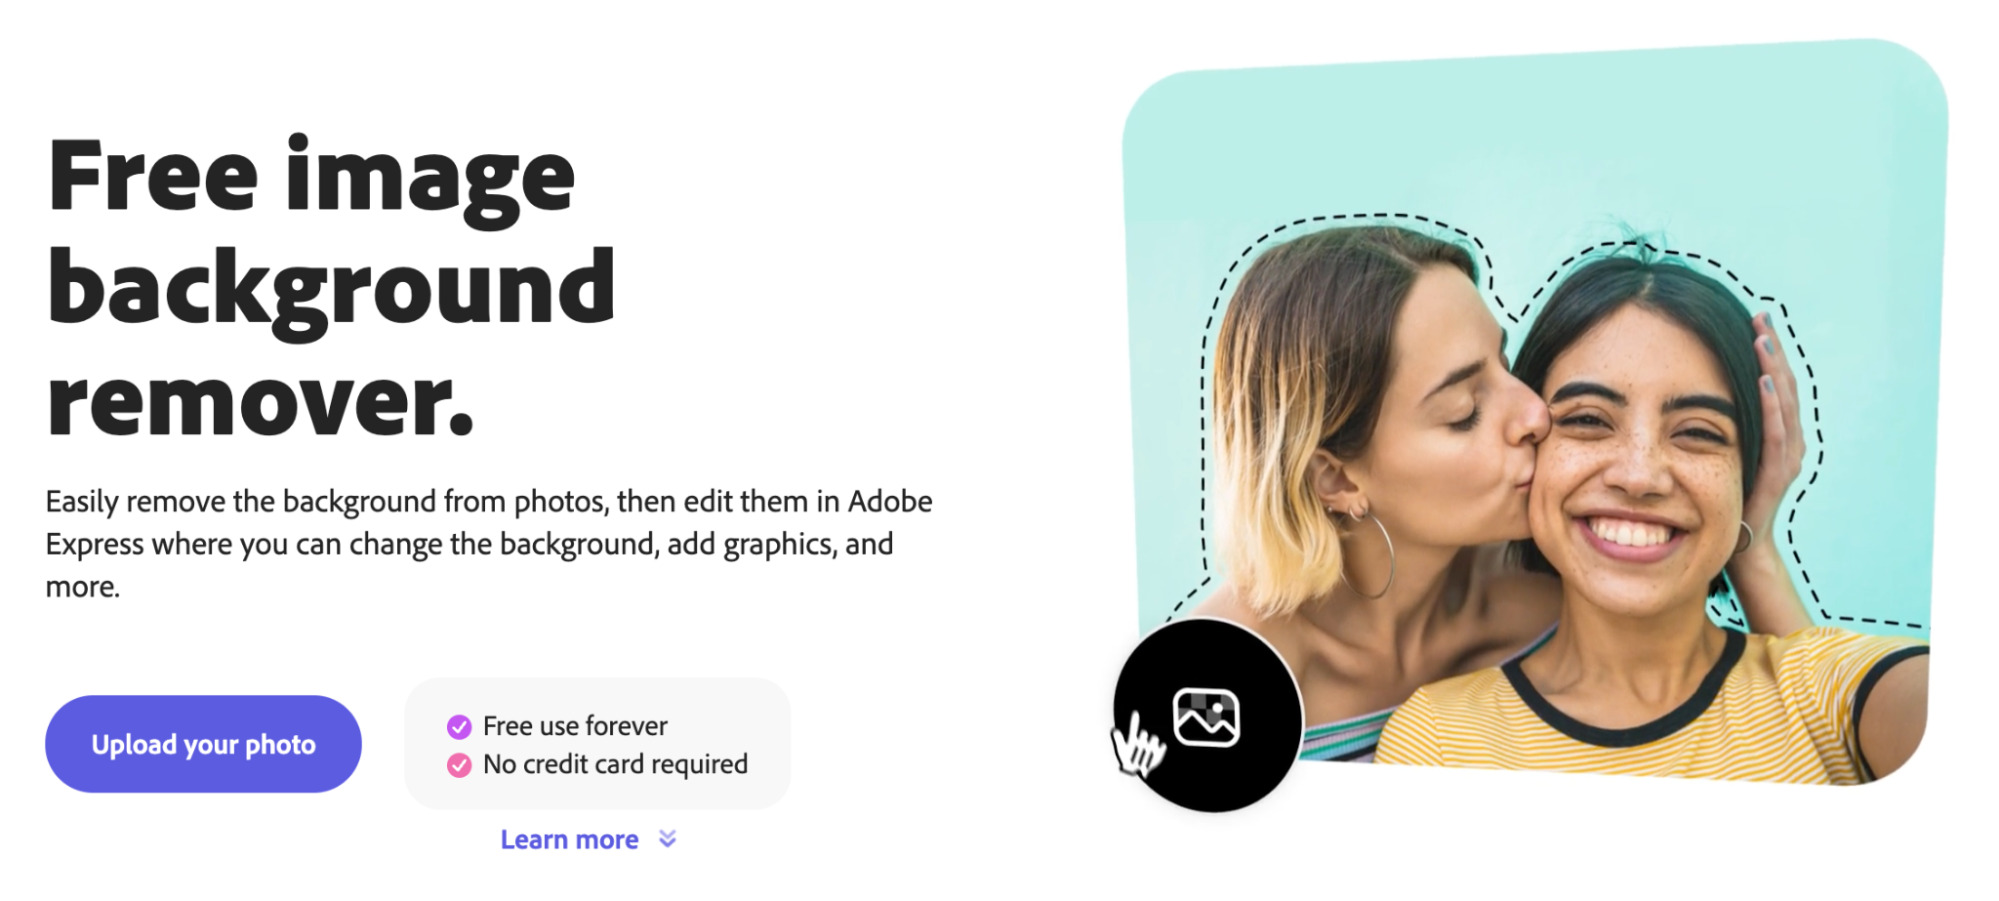 Adobe's Free Image Background Remover 